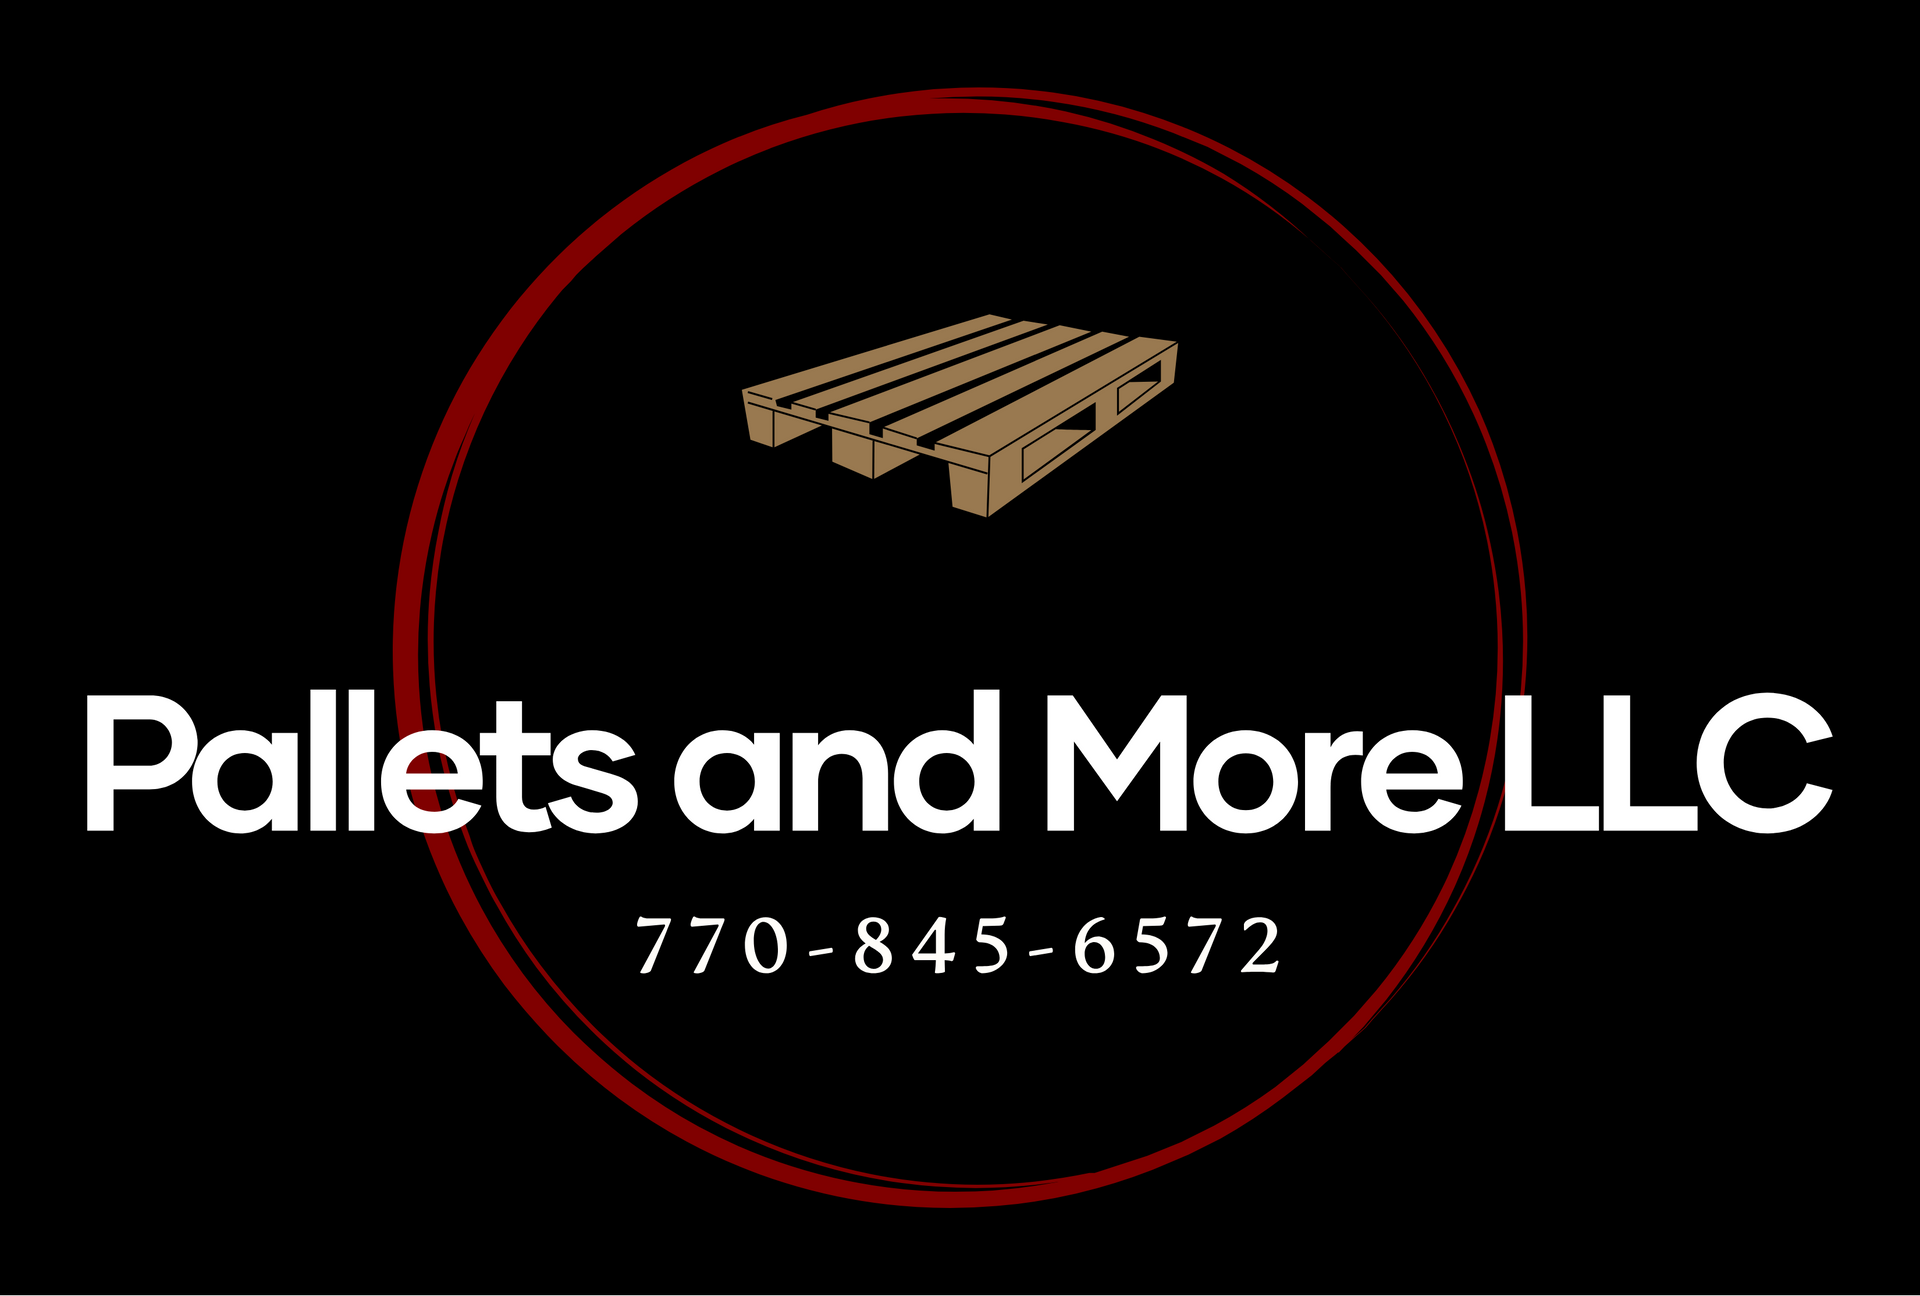 Pallets and More LLC Logo Home Page Tablet